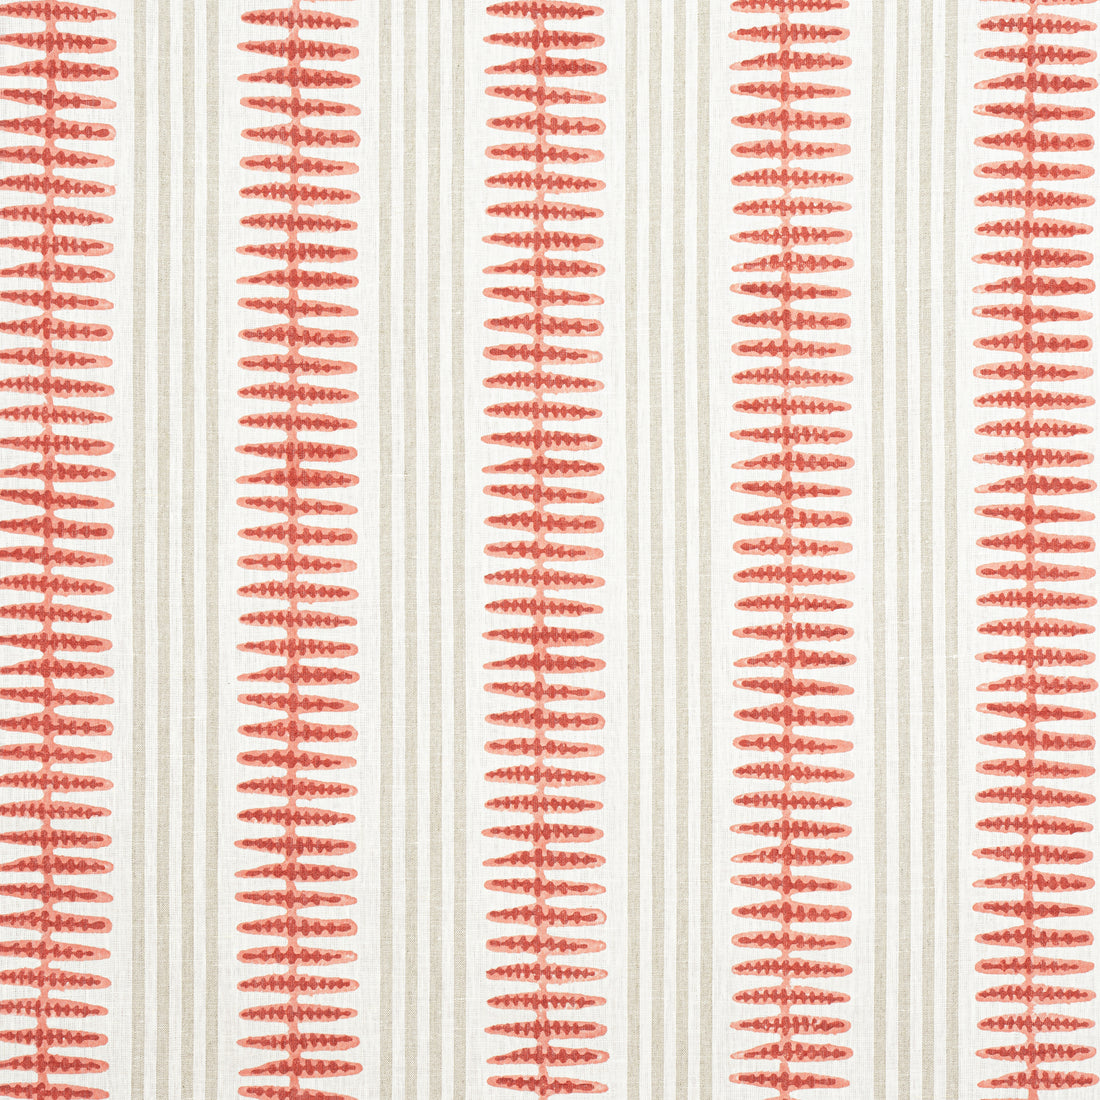 Indo Stripe fabric in sunbaked color - pattern number F981319 - by Thibaut in the Montecito collection